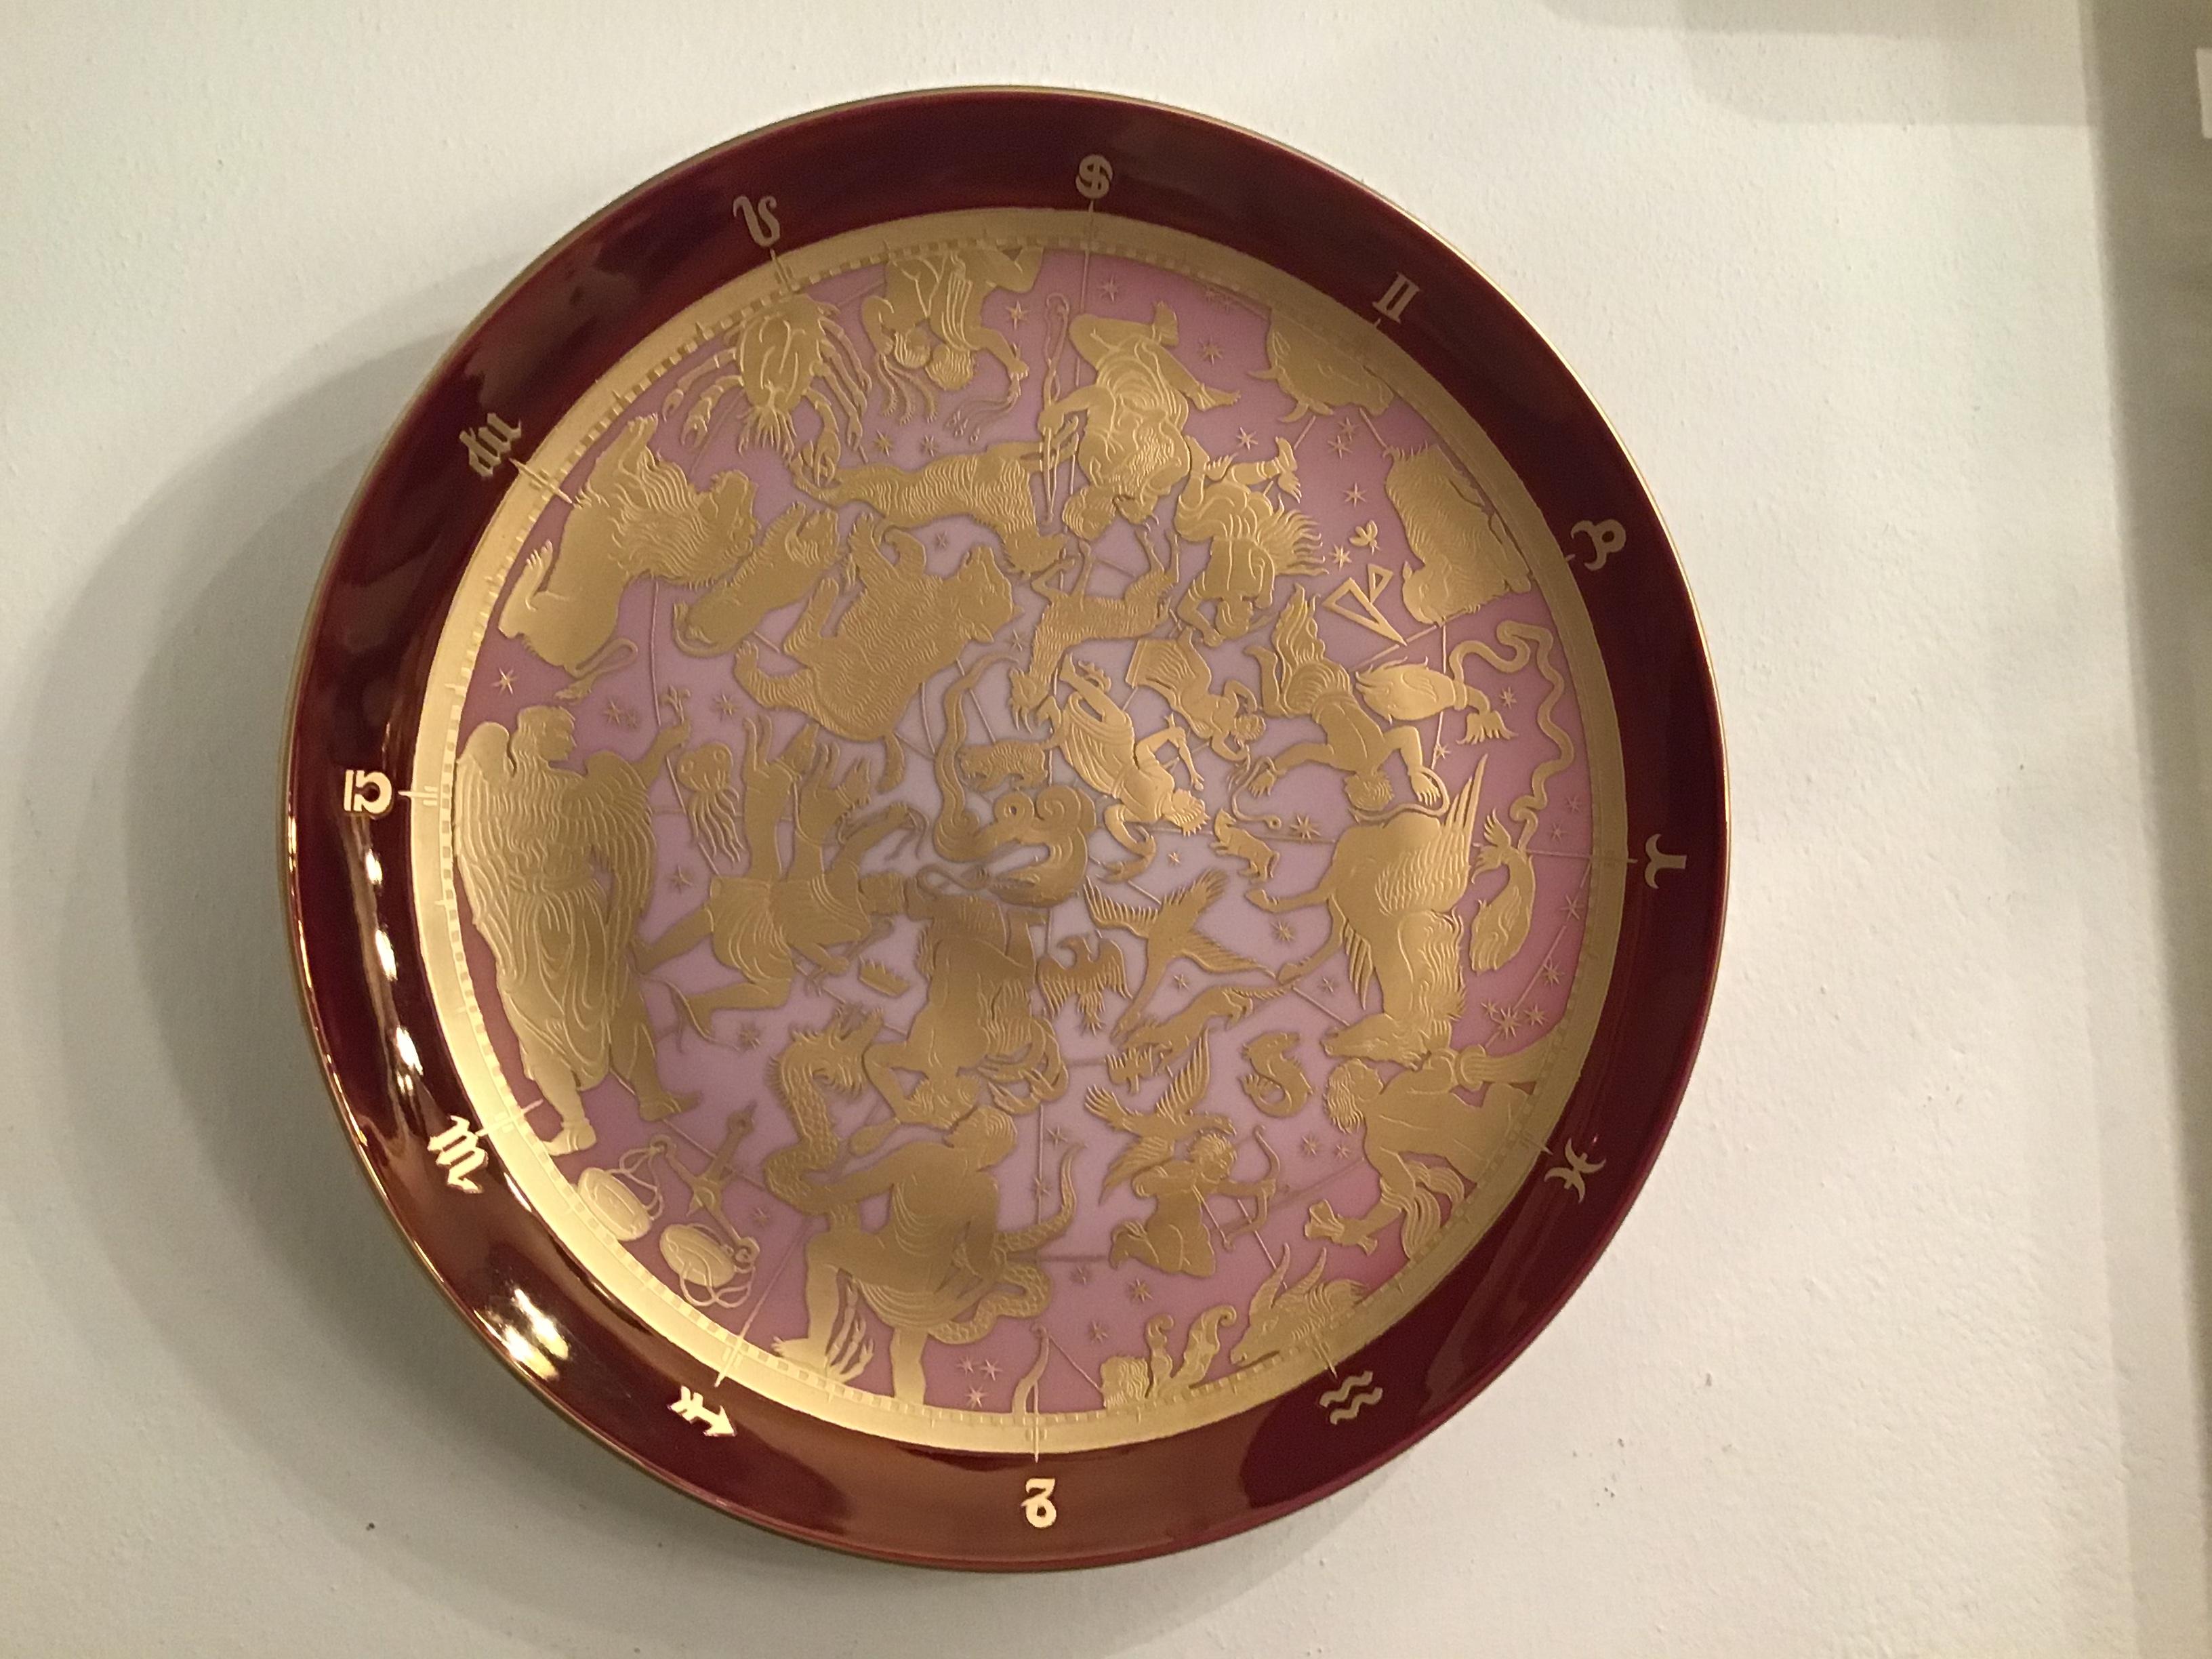 Morbelli Porcelain Wall Plate “Planisfero Celeste” Worked with Pure Gold 1960 It For Sale 4